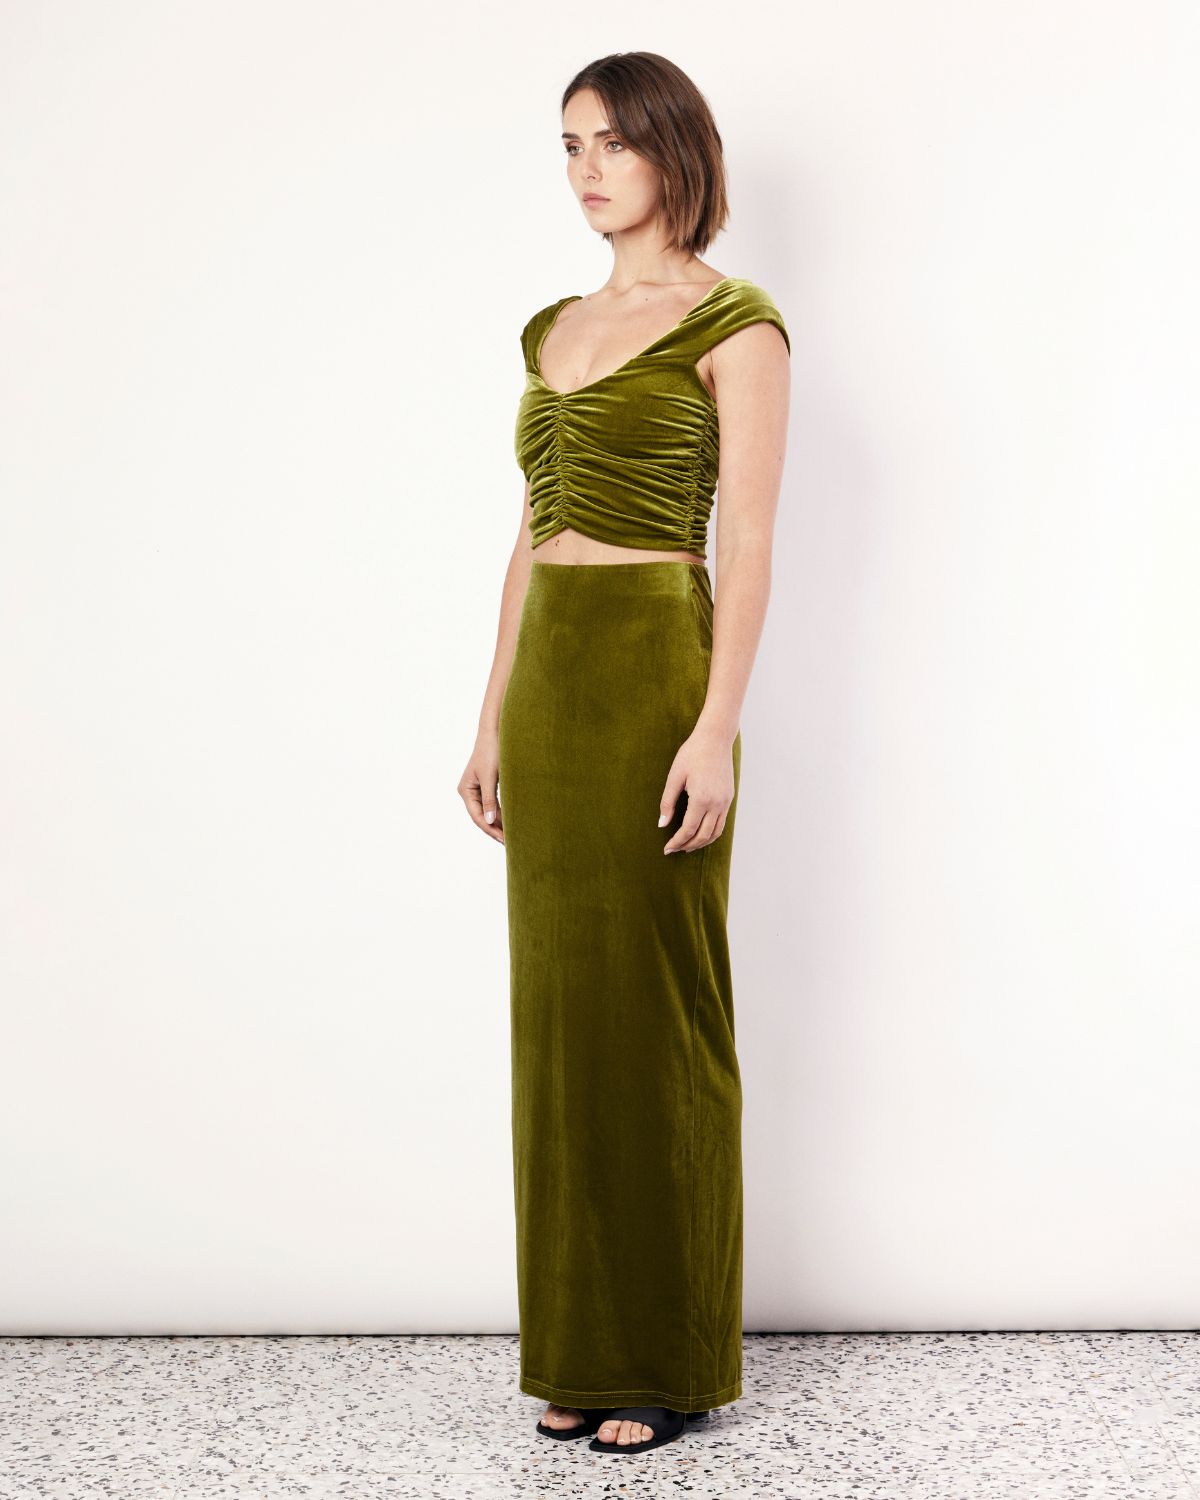 The Velvet Maxi Skirt is a figure hugging silhouette that falls to an elegant maxi length. It has an elastic waistband and is crafted from a plush stretch Velvet fabrication in a stunning green hue. Now available at Romy. 